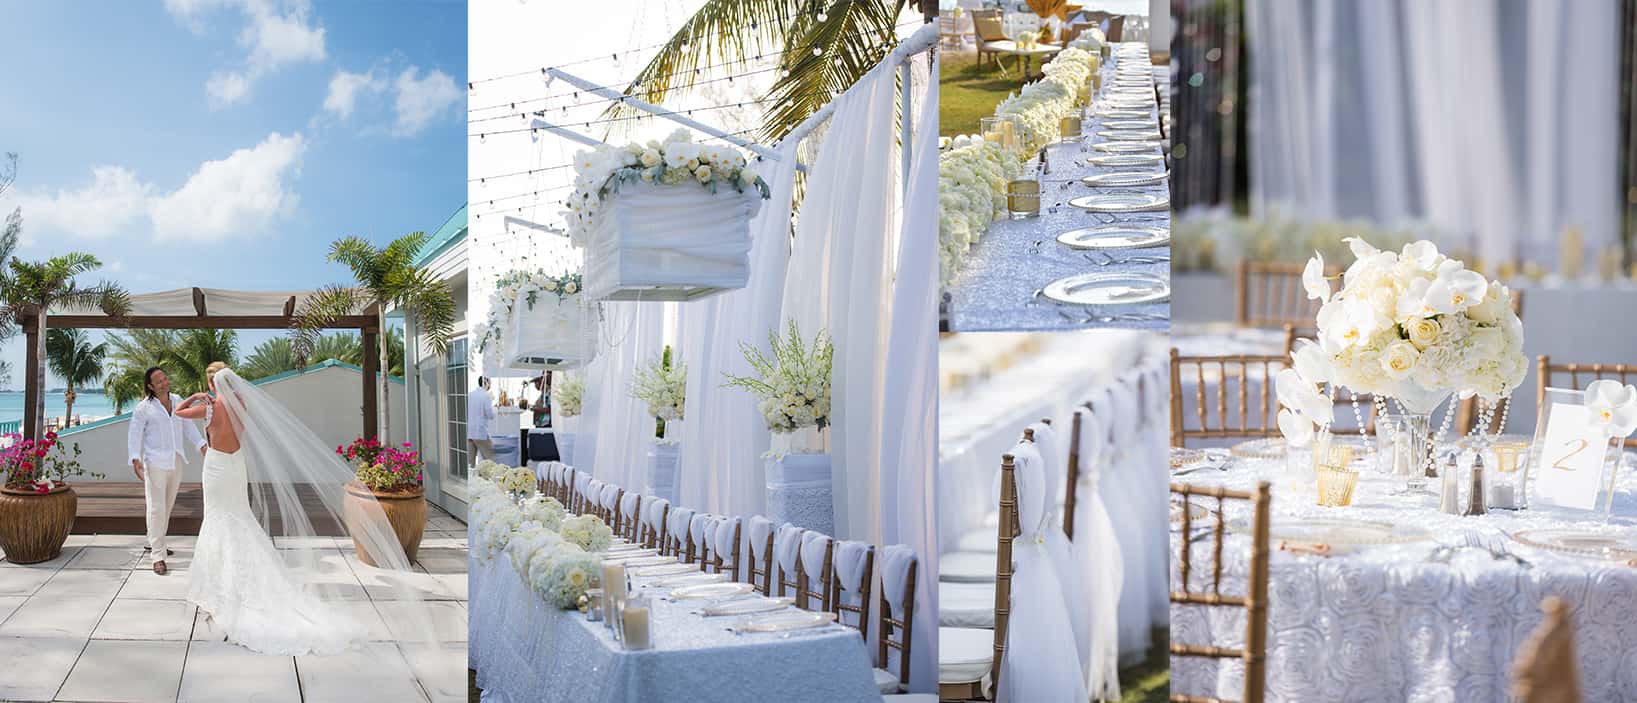 wedding reception luxury orchids - all white wedding - getting married in the cayman islands